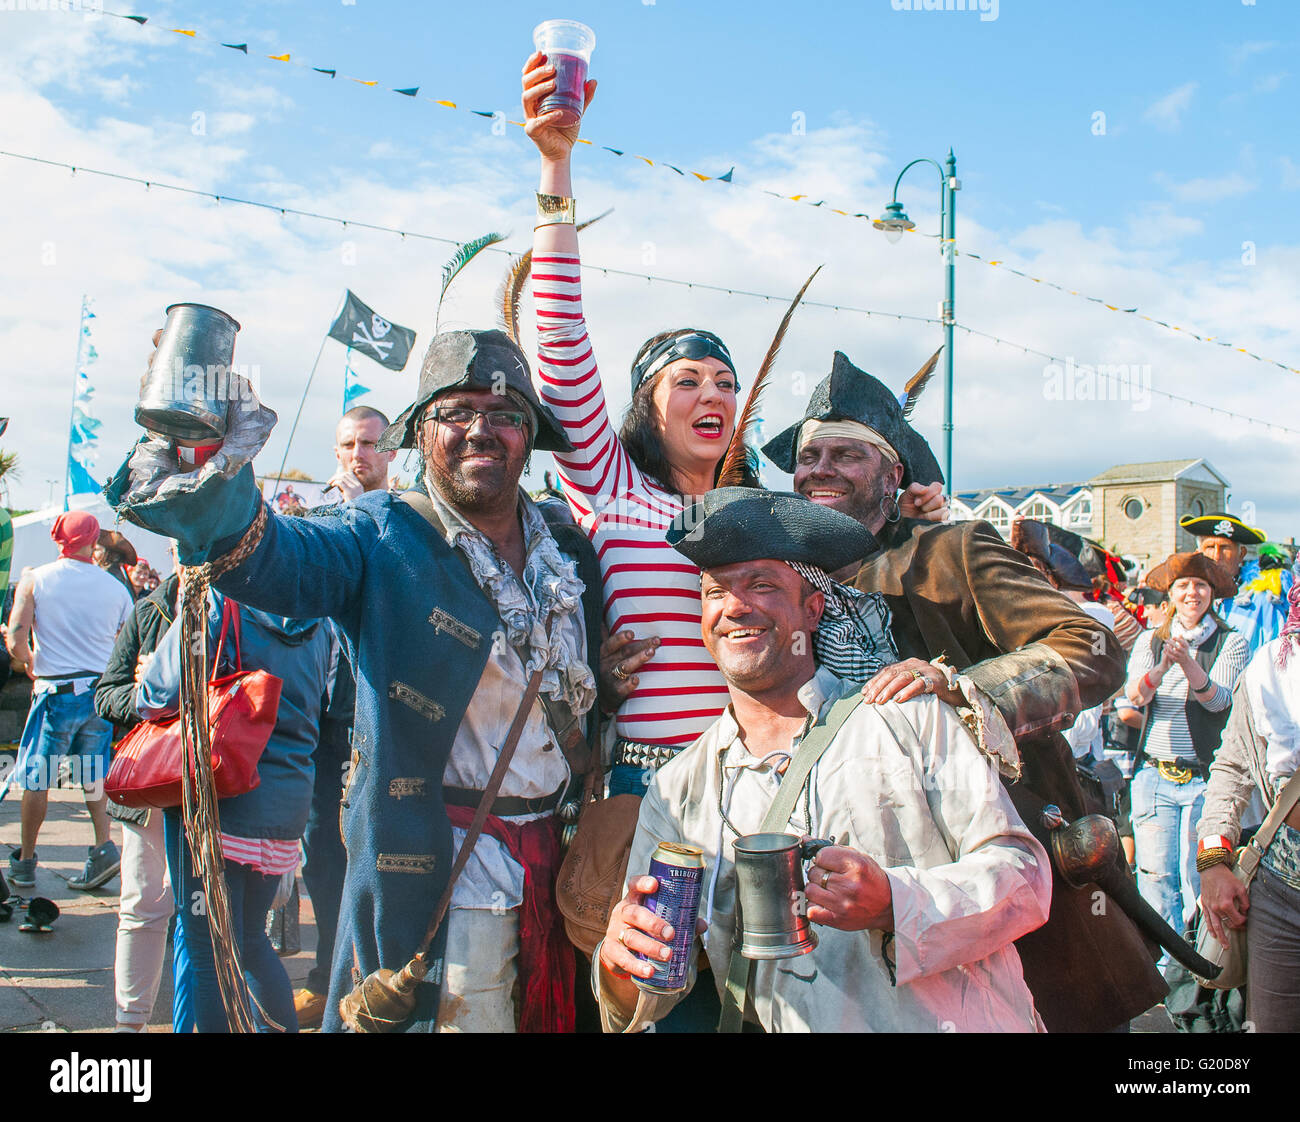 Pirates during the Guinness world book records attempt of assembling the most pirates in one location at one time. Penzance. Stock Photo